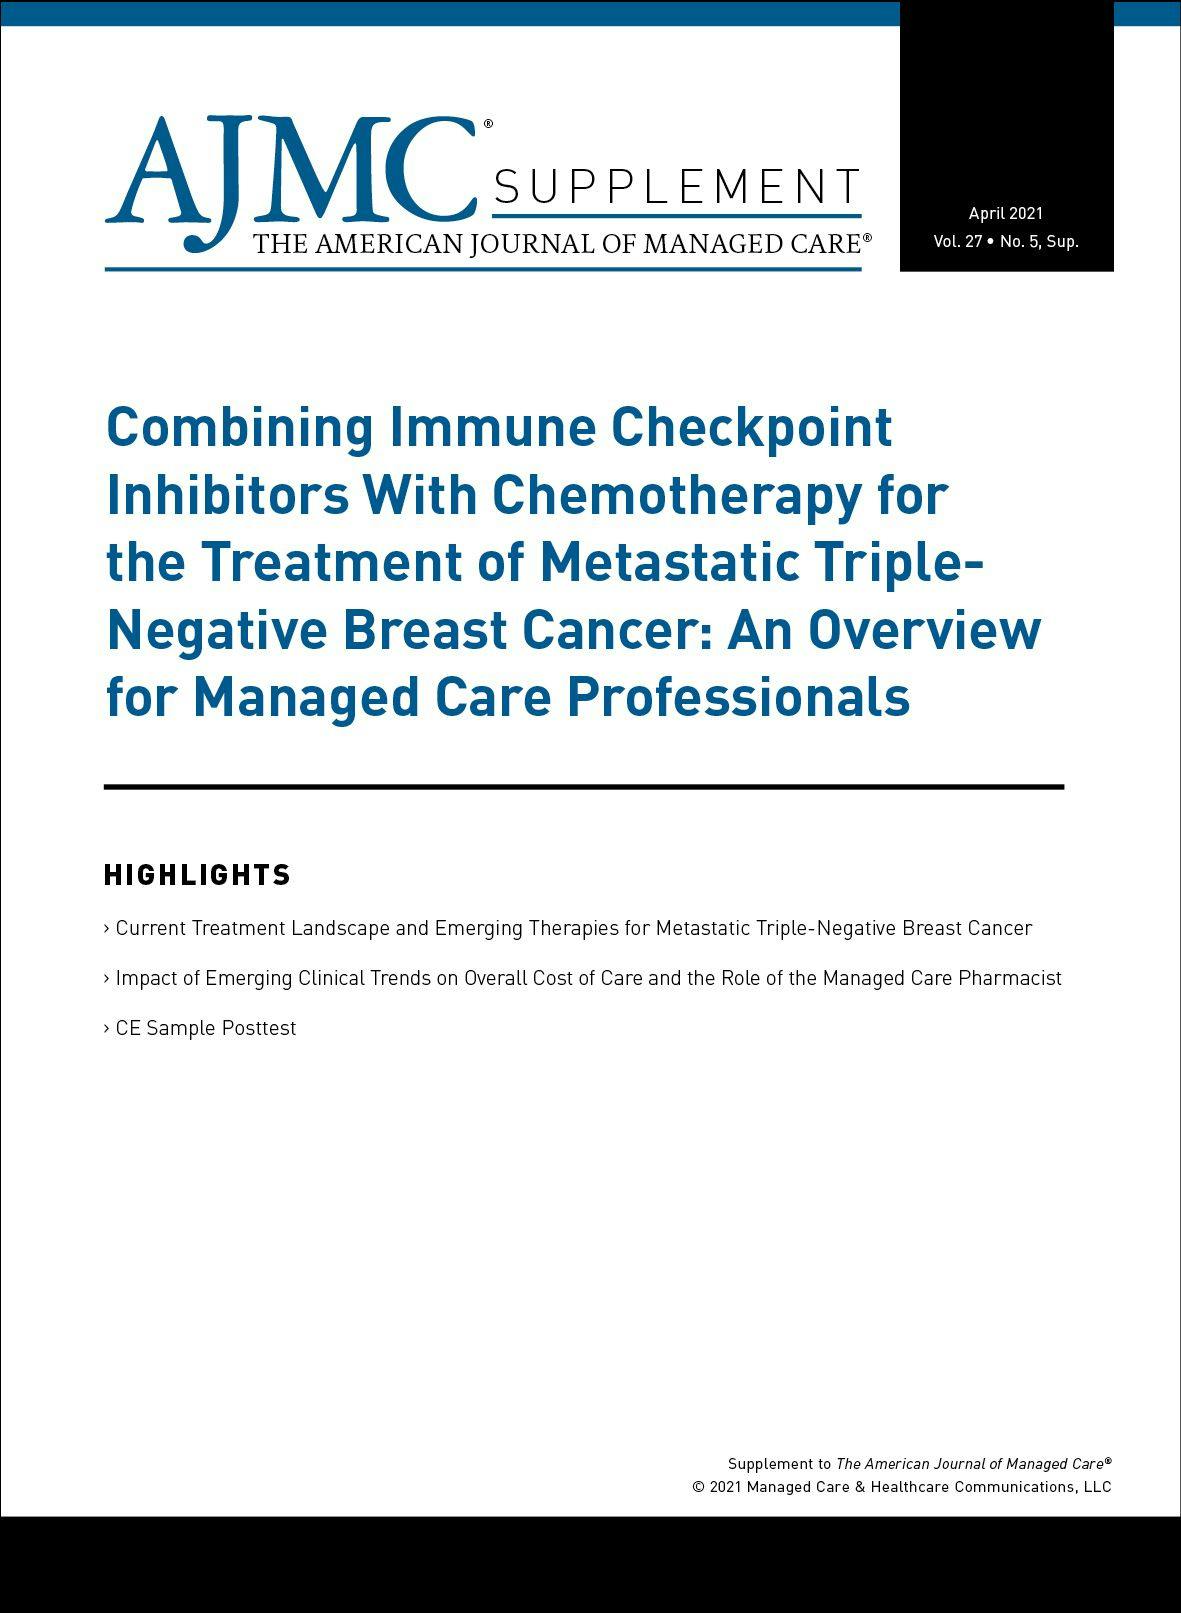 Combining Immune Checkpoint Inhibitors With Chemotherapy for the Treatment of Metastatic Triple-Negative Breast Cancer: An Overview for Managed Care Professionals